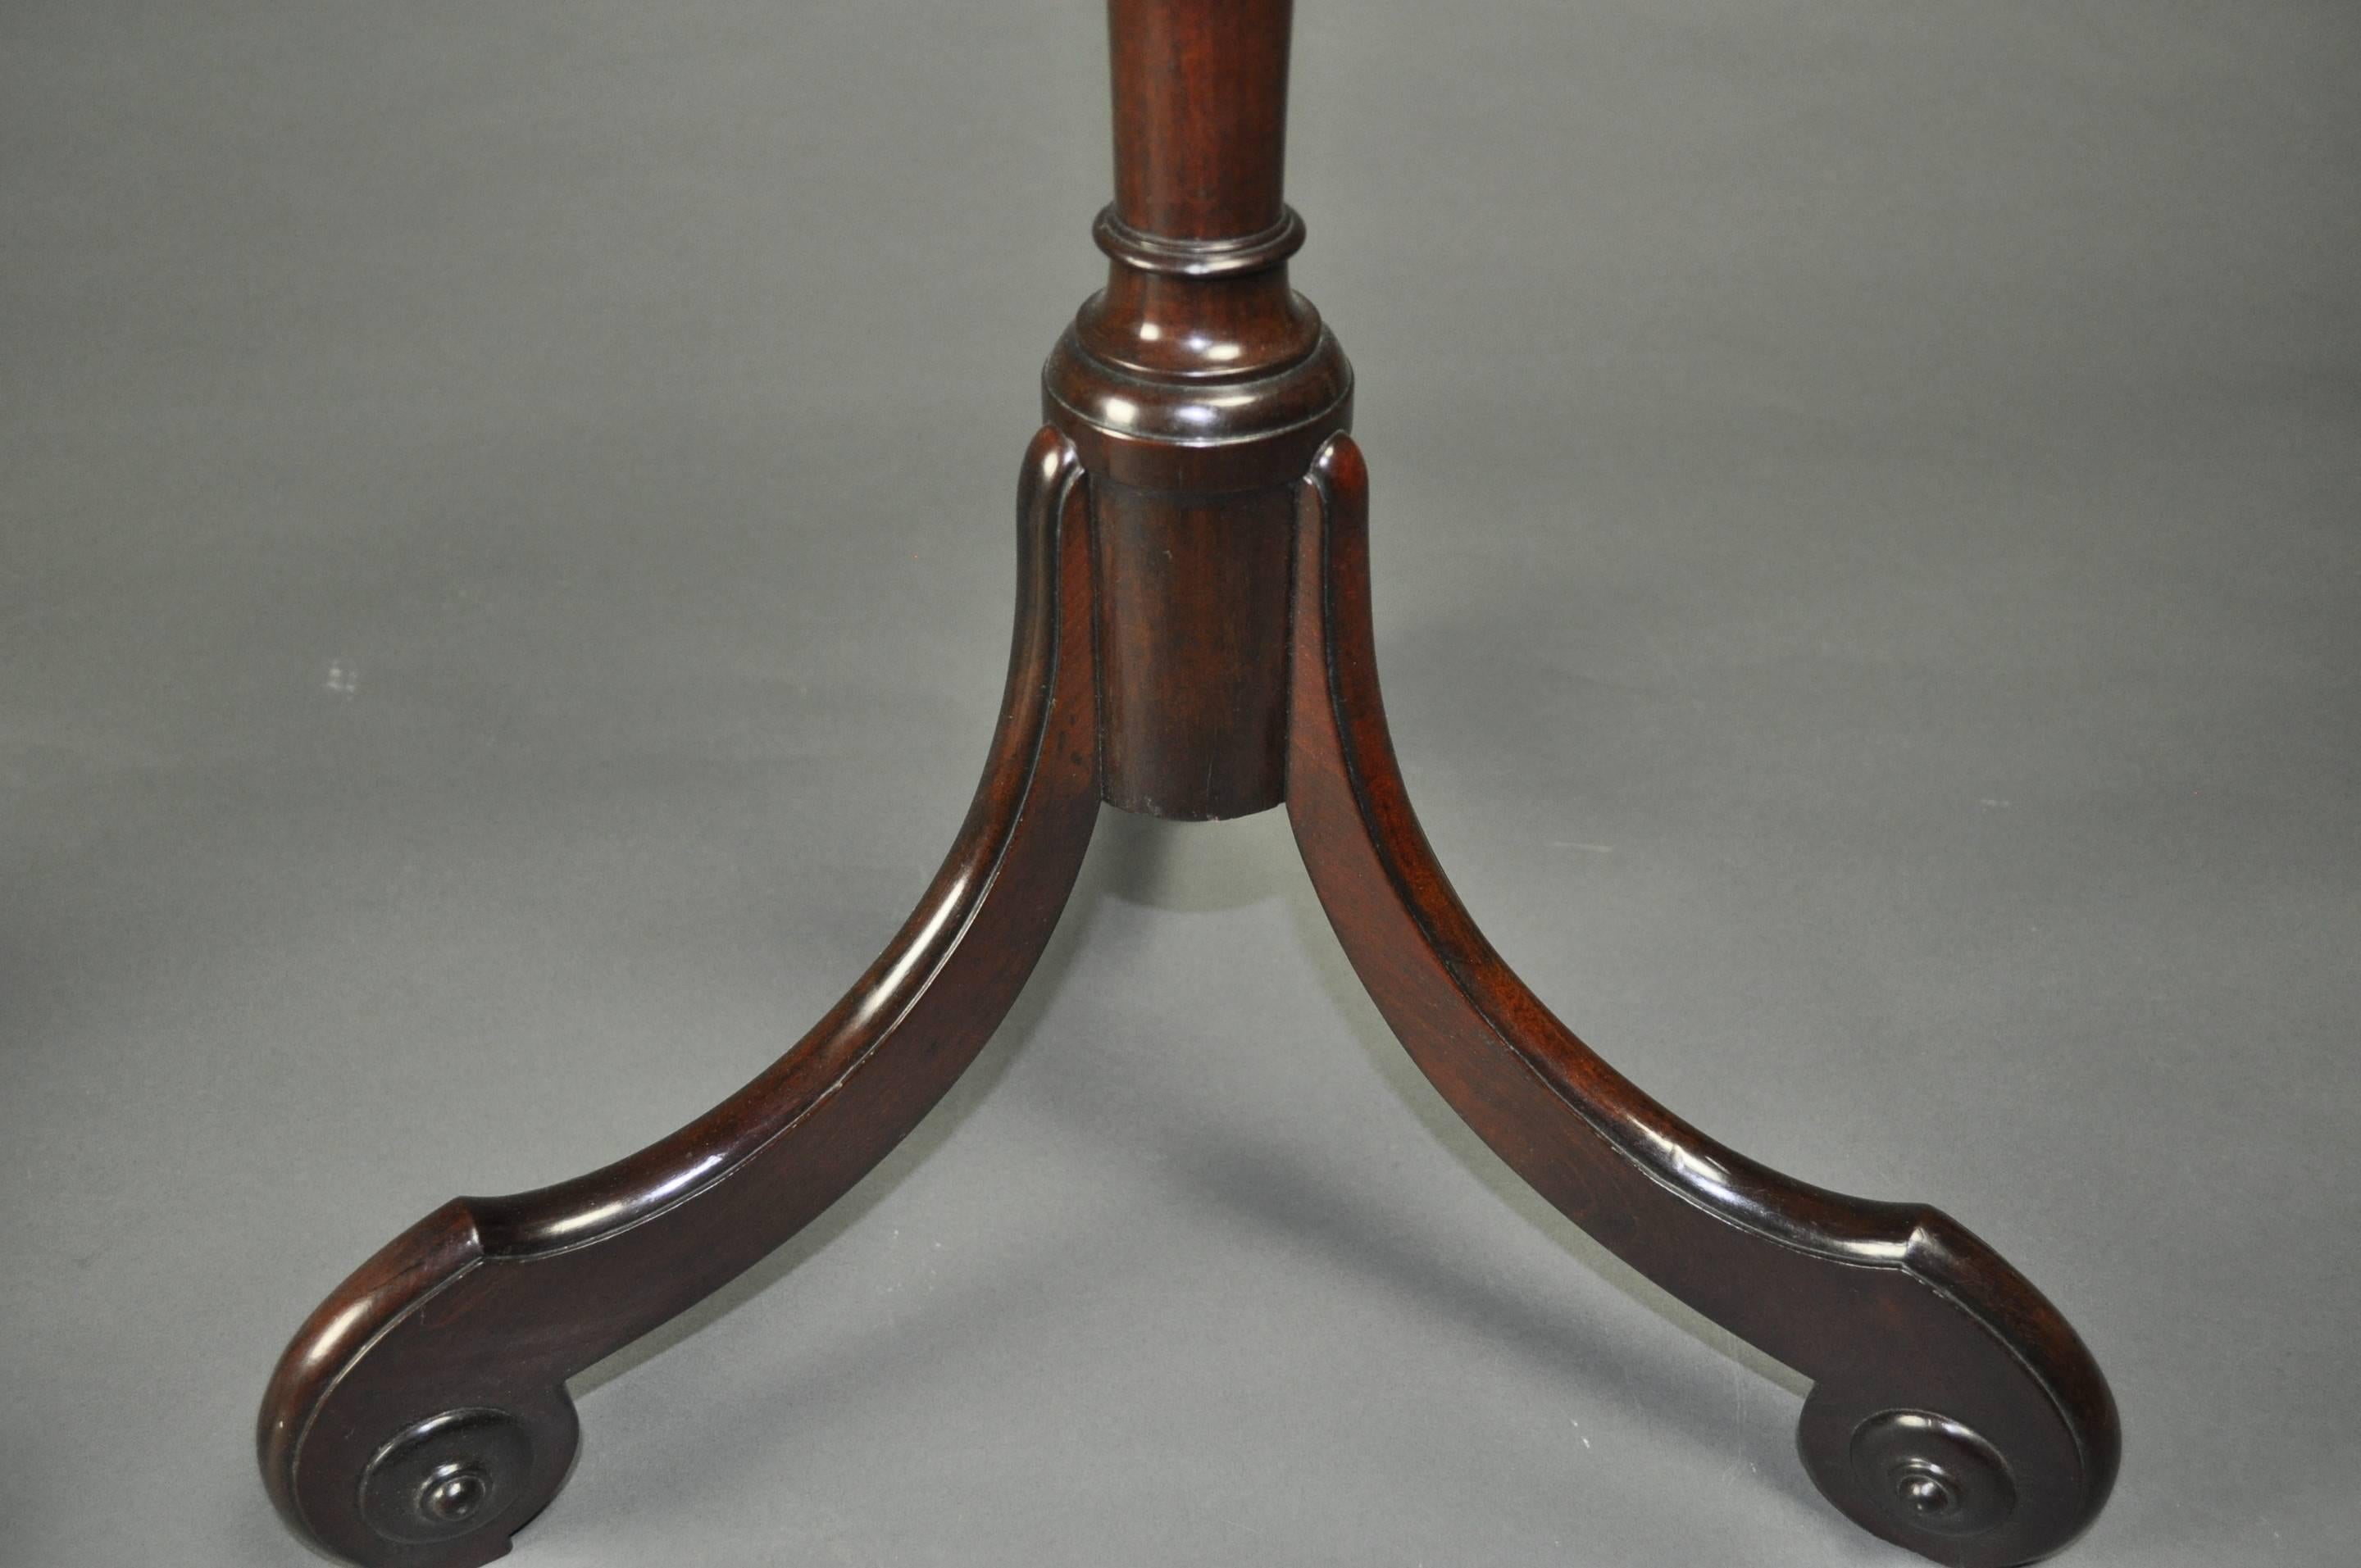 A fine and rare pair of Virginia walnut, early 18th century torchères, with flower-shaped and dished tops supported on turned stems with umbrella-shaped scrolled tripod bases.